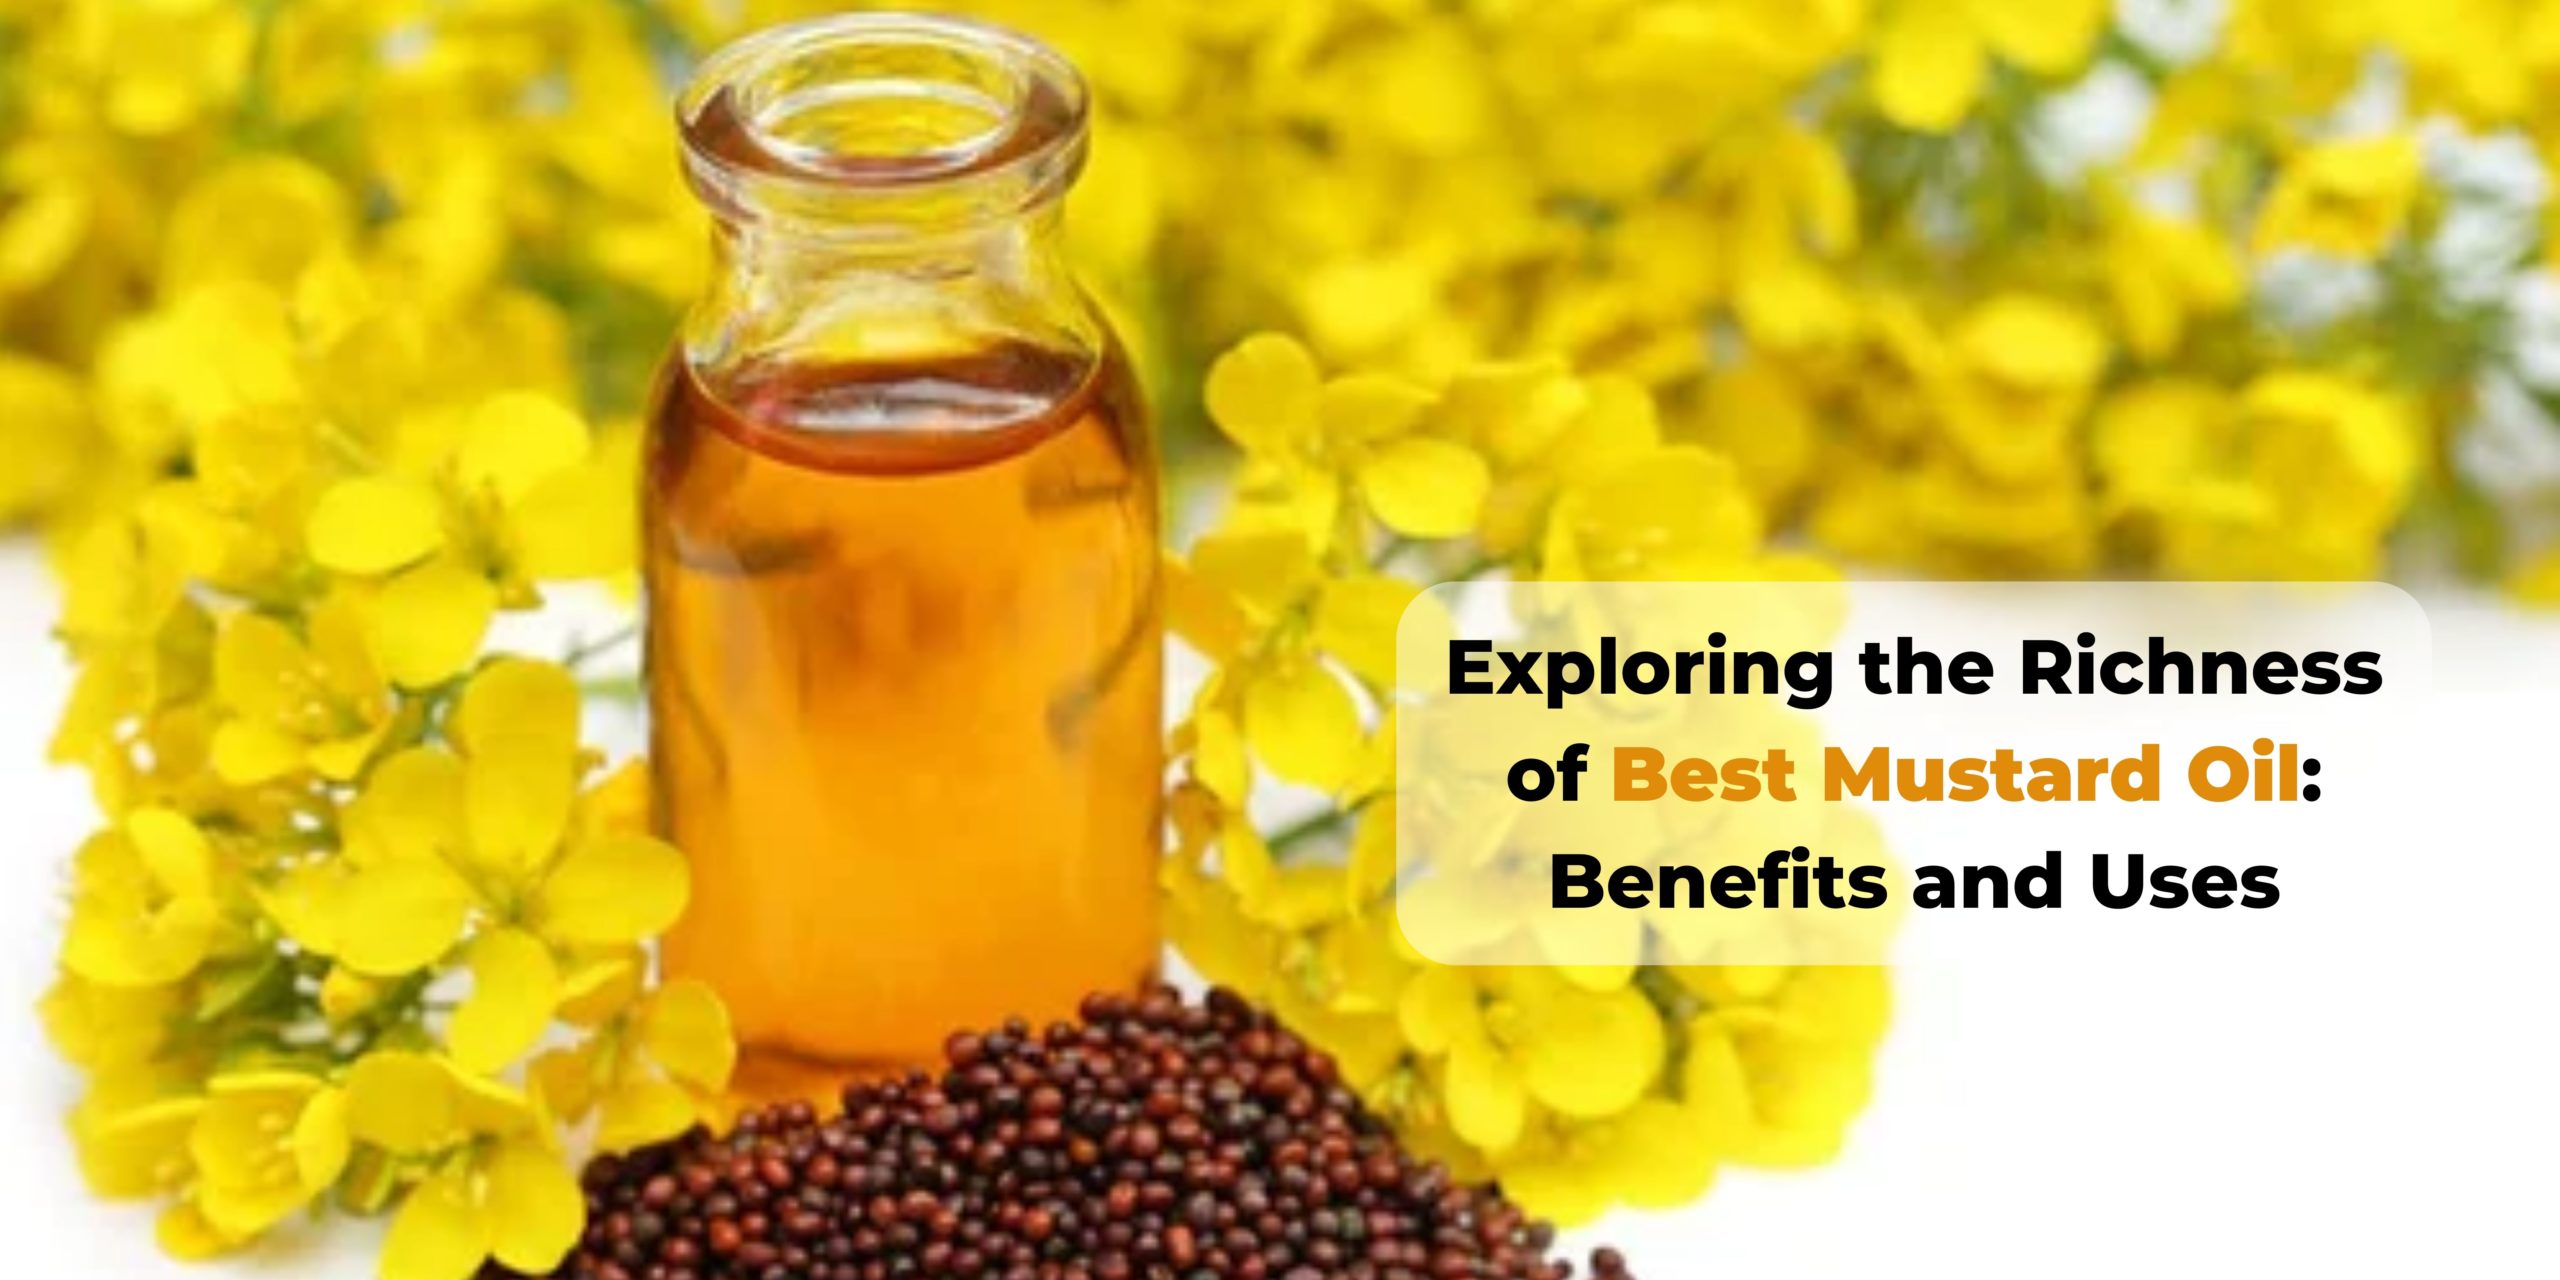 Exploring the Richness of Best Mustard Oil: Benefits and Uses